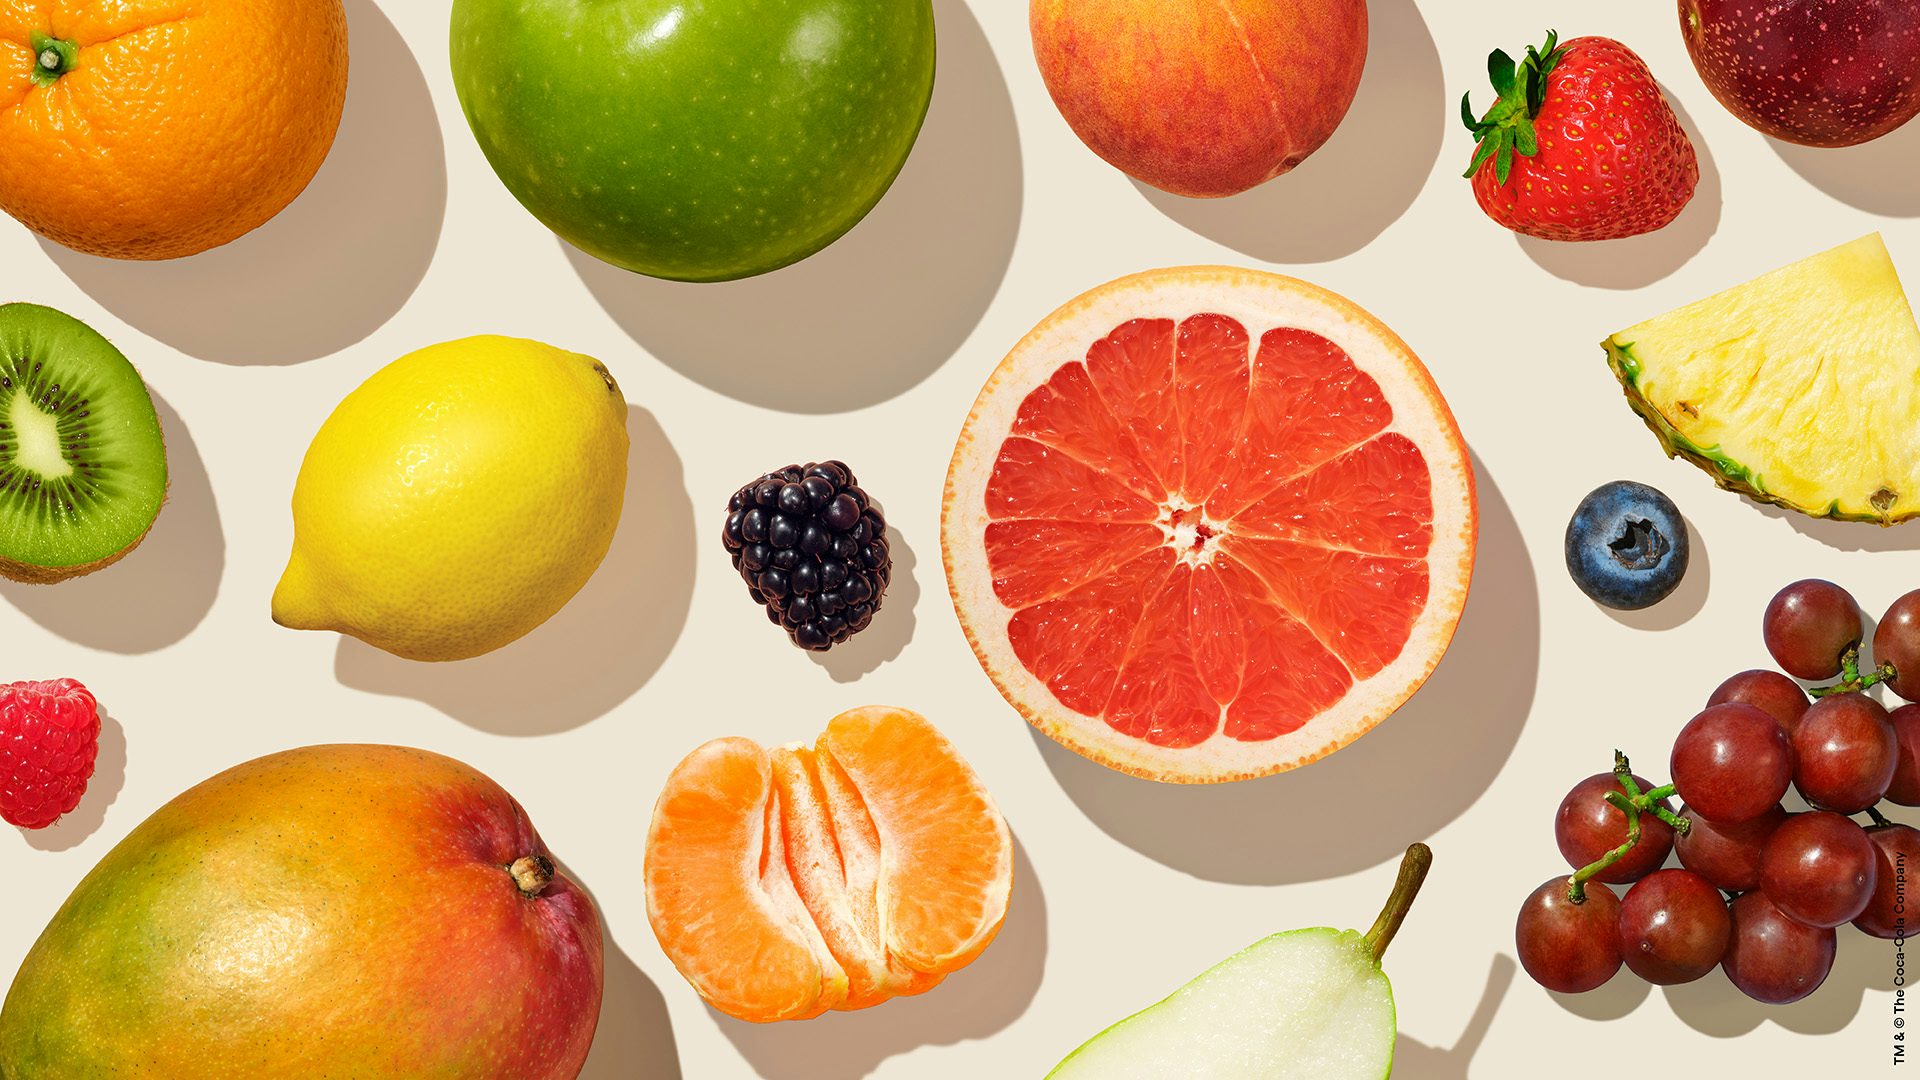 Image created as part of Minute Maid's new branding showing a flat-lay photograph of various fruits